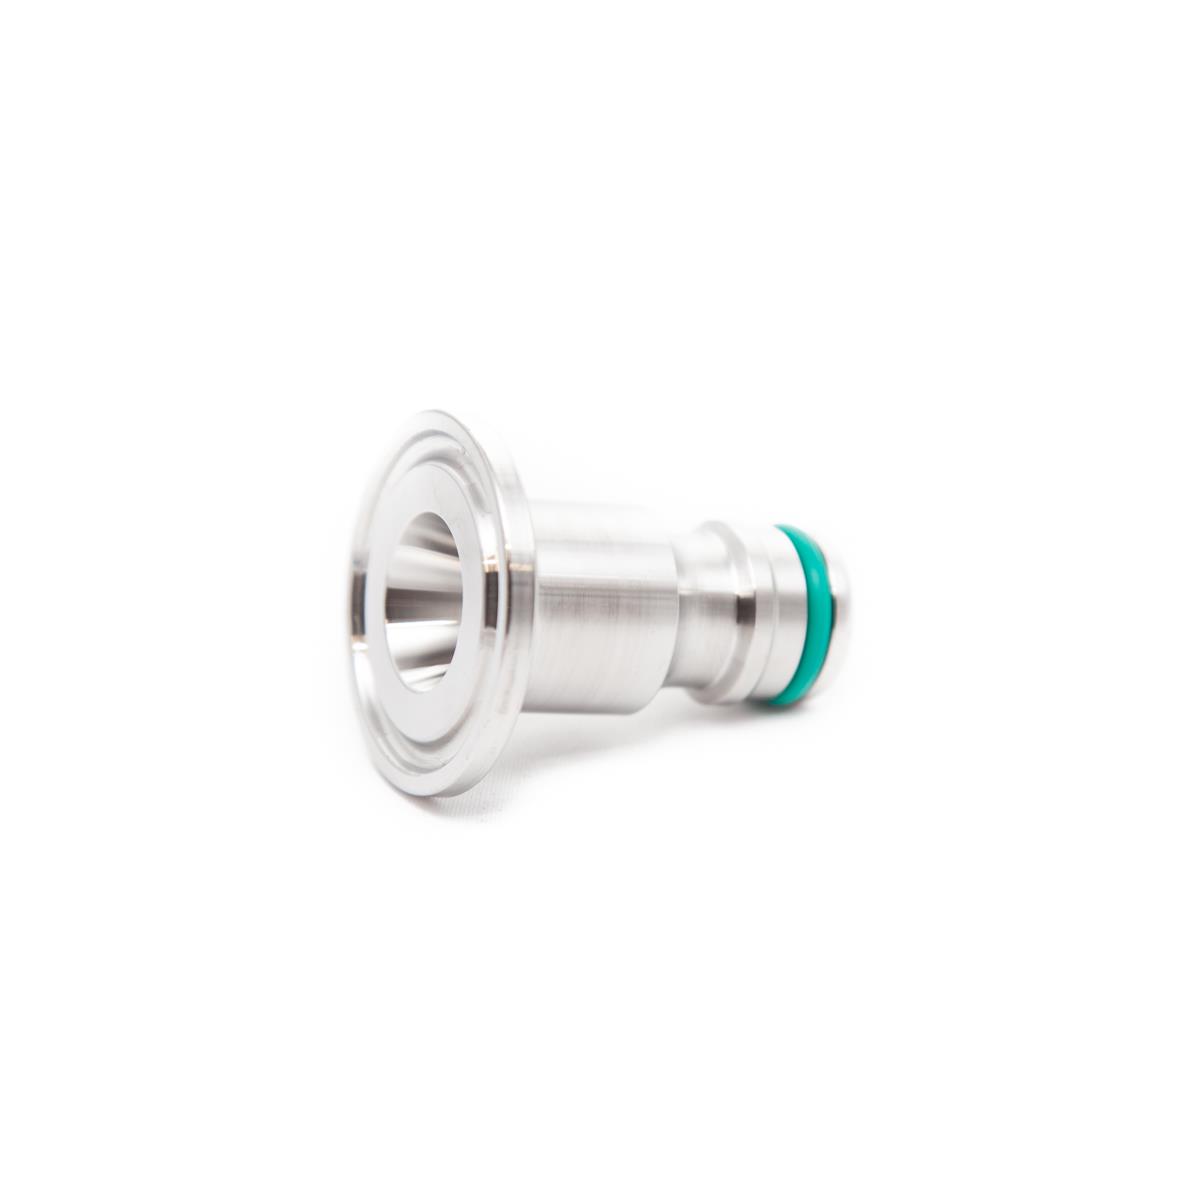 TC34mm to Garden Connector